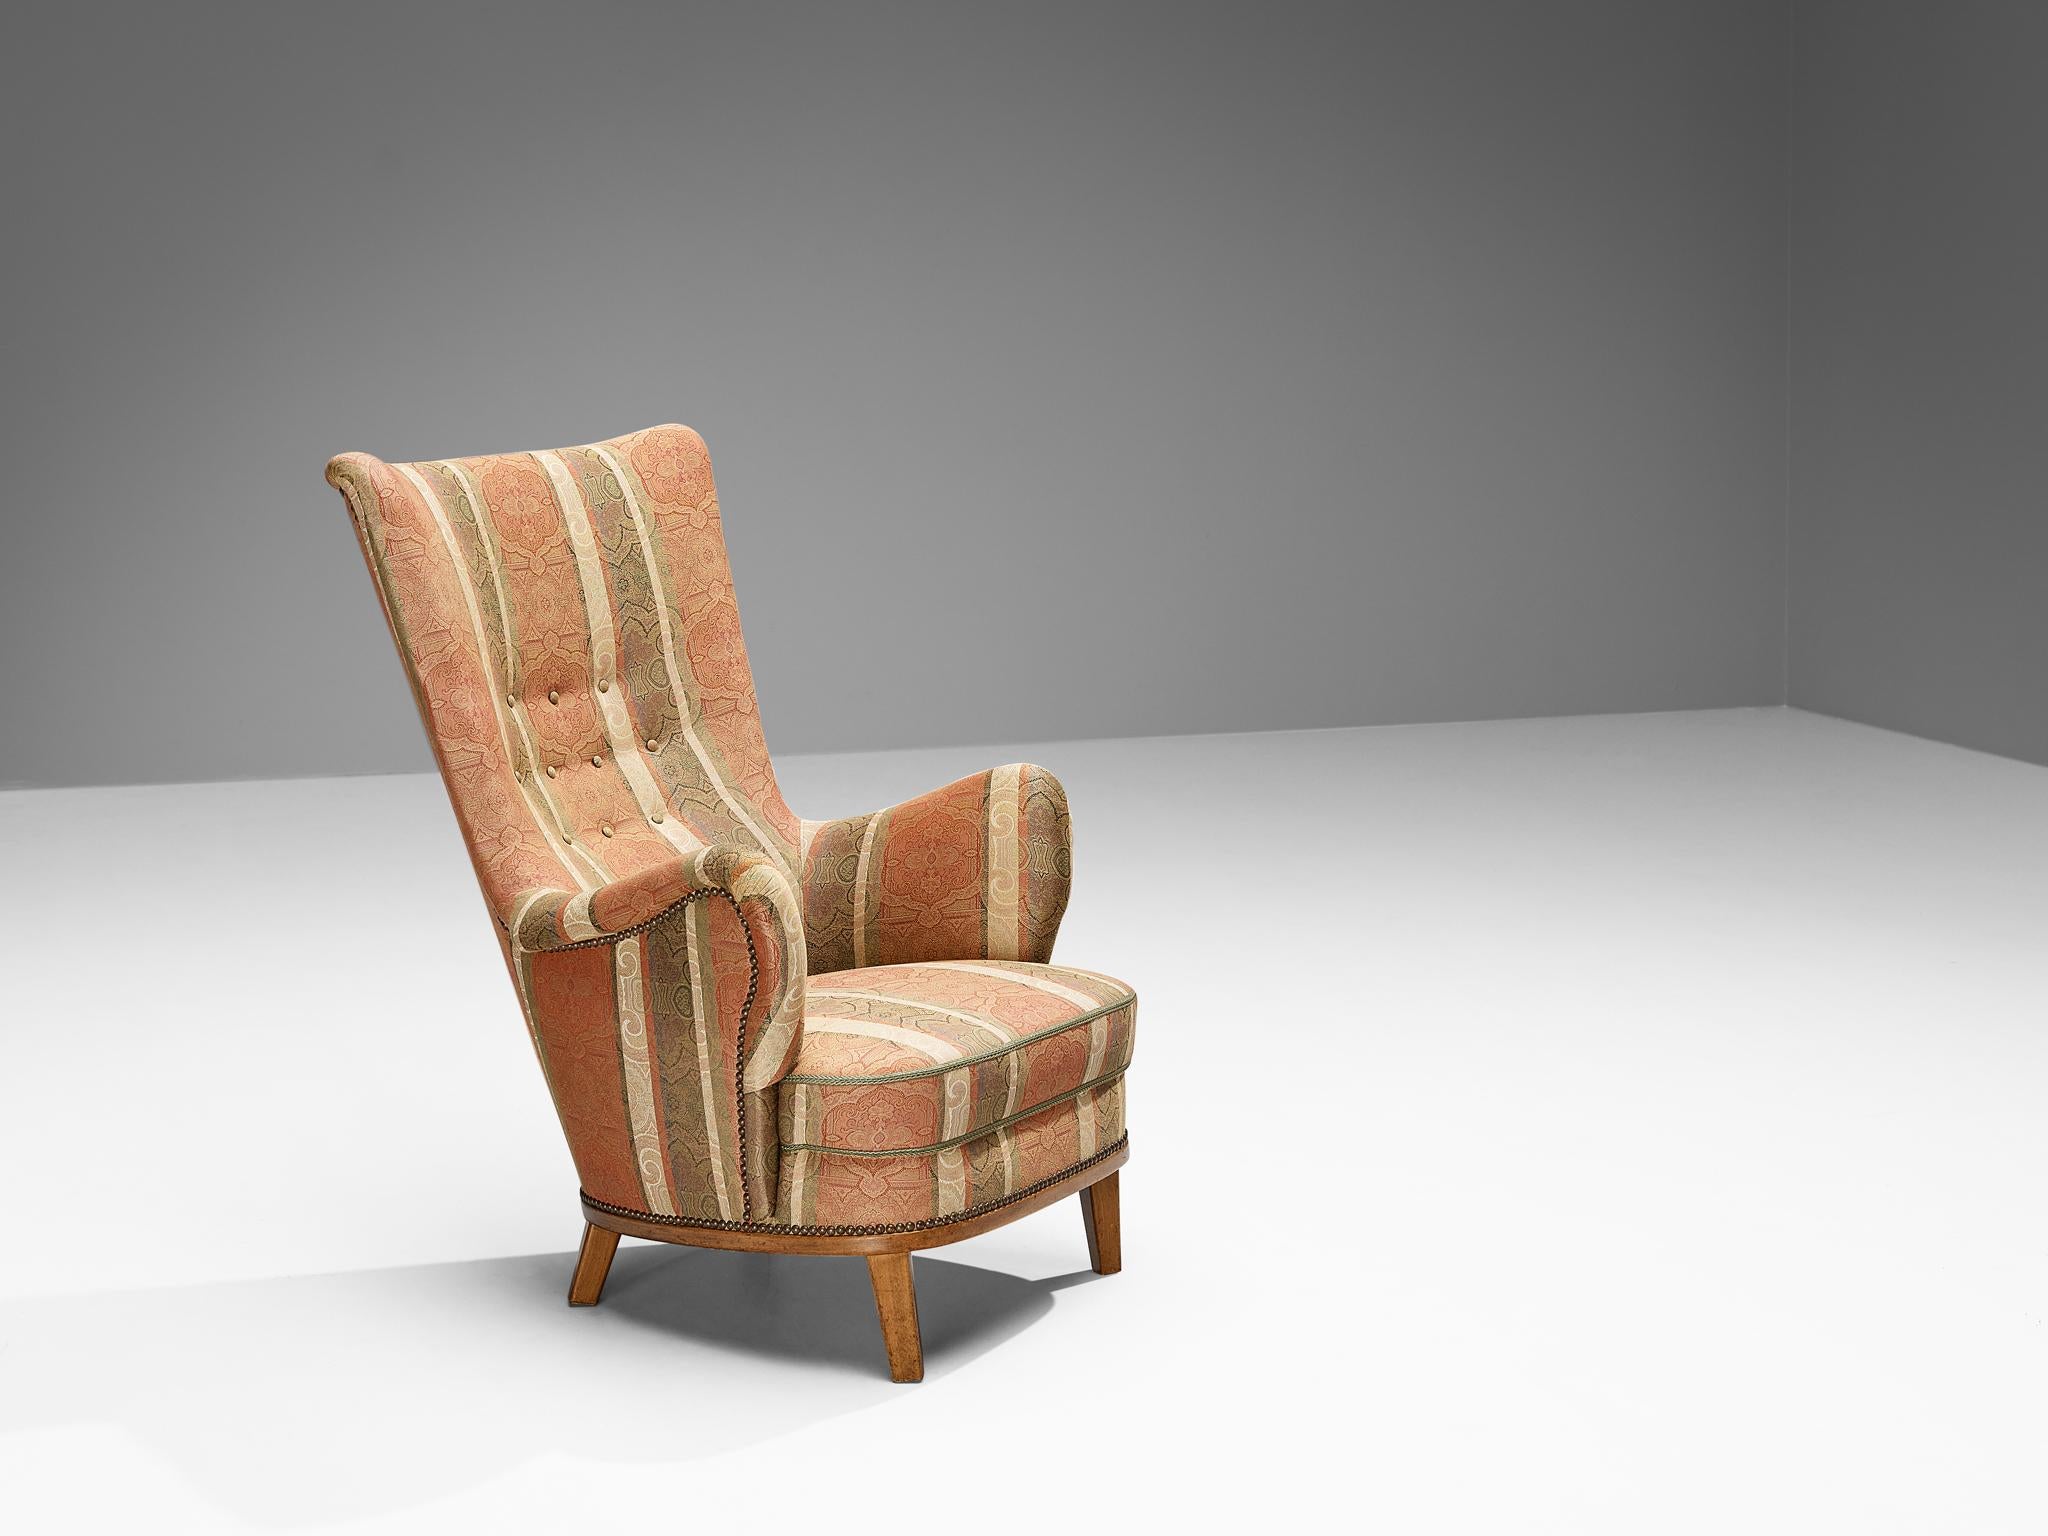 Charming Danish Easy Chair in Patterned Upholstery